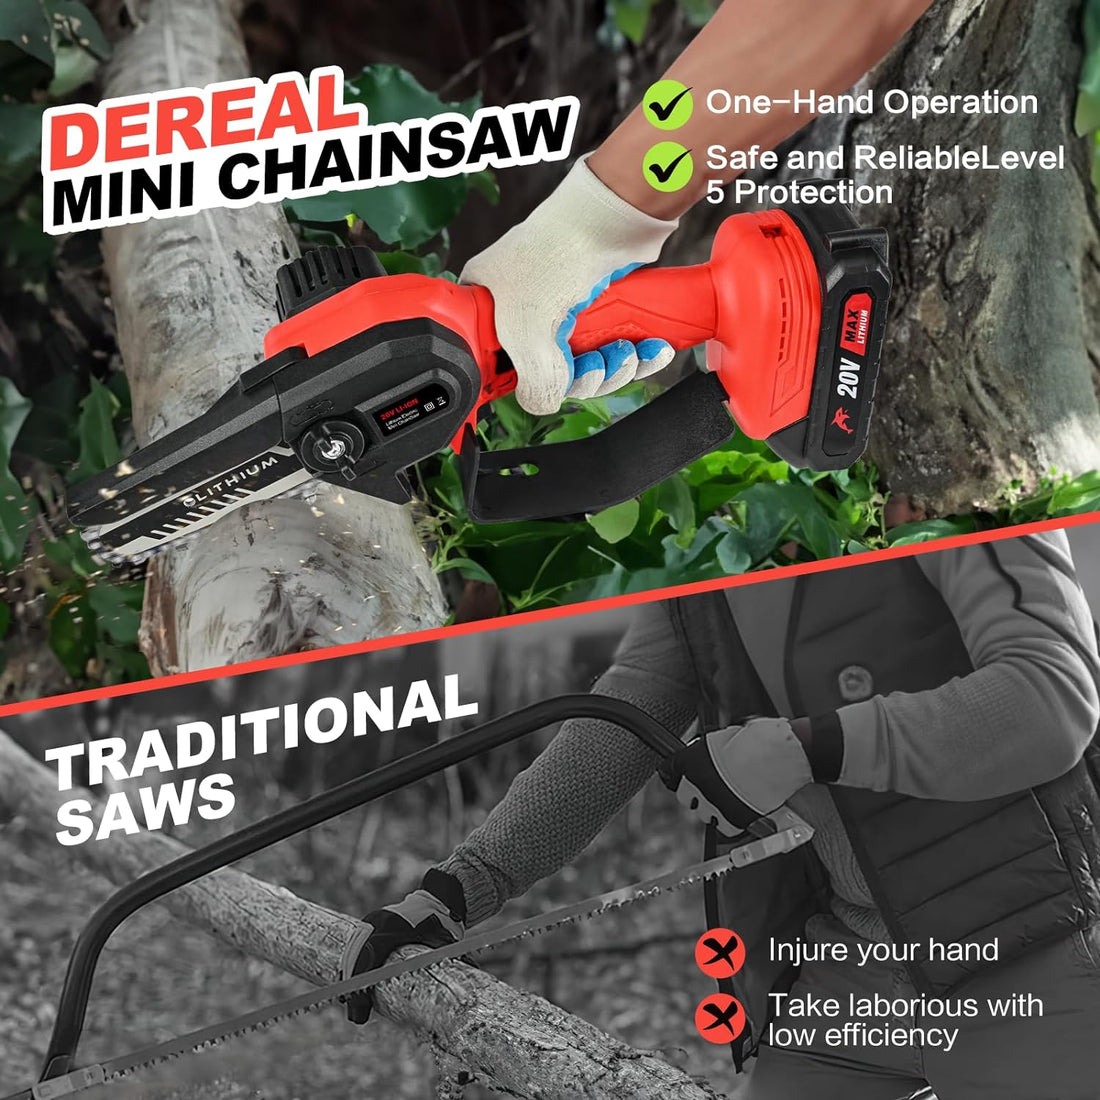 Mini Chainsaw Cordless, DEREAL 4-Inch Mini Chain Saw Battery Powered,Portable Small Electric Power Chainsaw for Wood Cutting, Courtyard,Tree Trimming, Household, and Garden